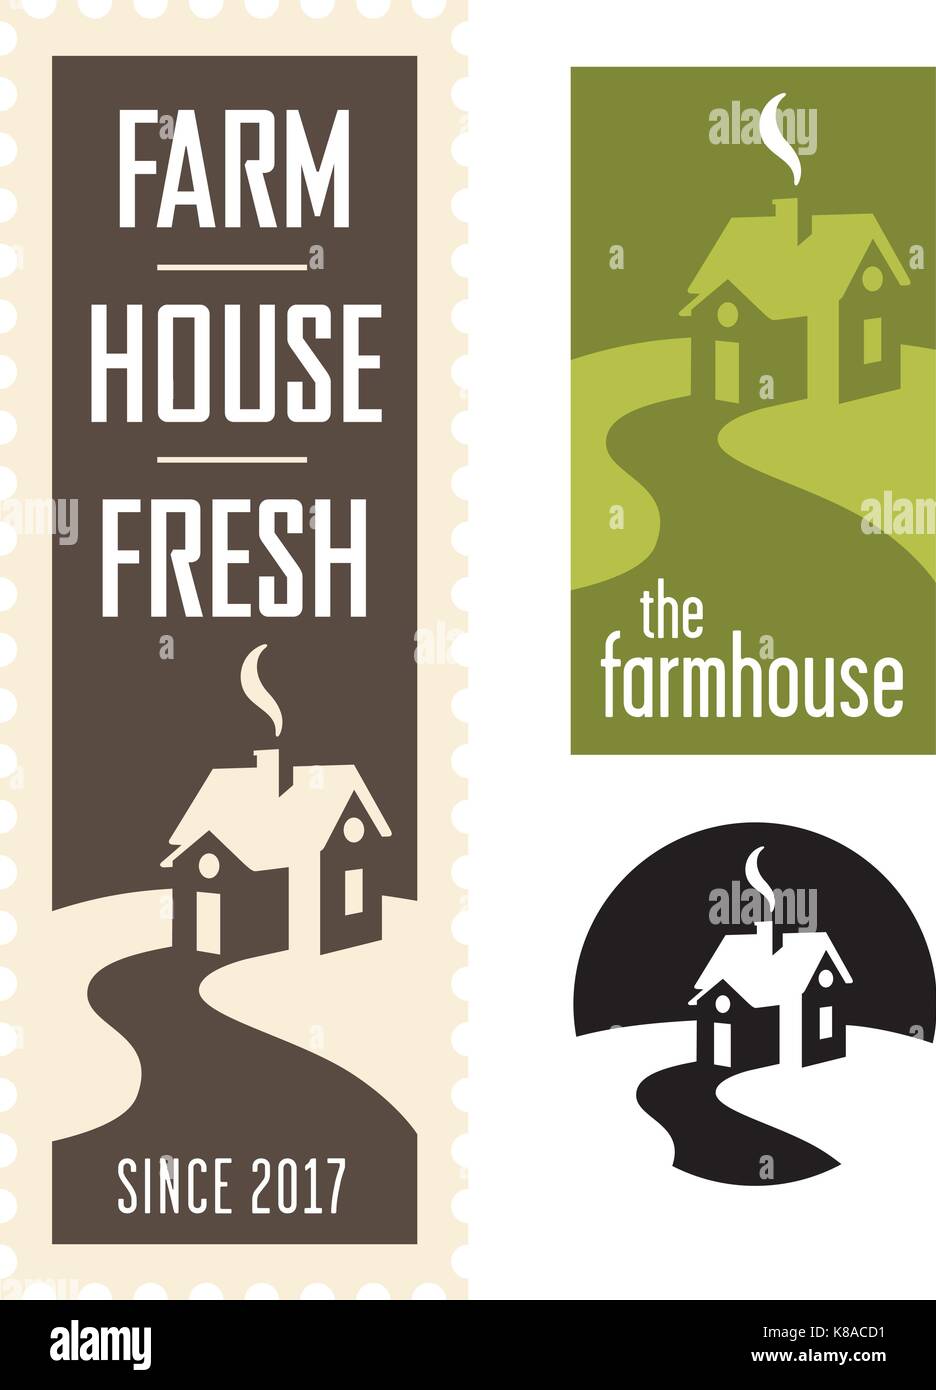 Set of Farmhouse Vector Logos Three farmhouse logos or badges with winding road leading to a quaint, country house with smoke coming from the chimney. Stock Vector